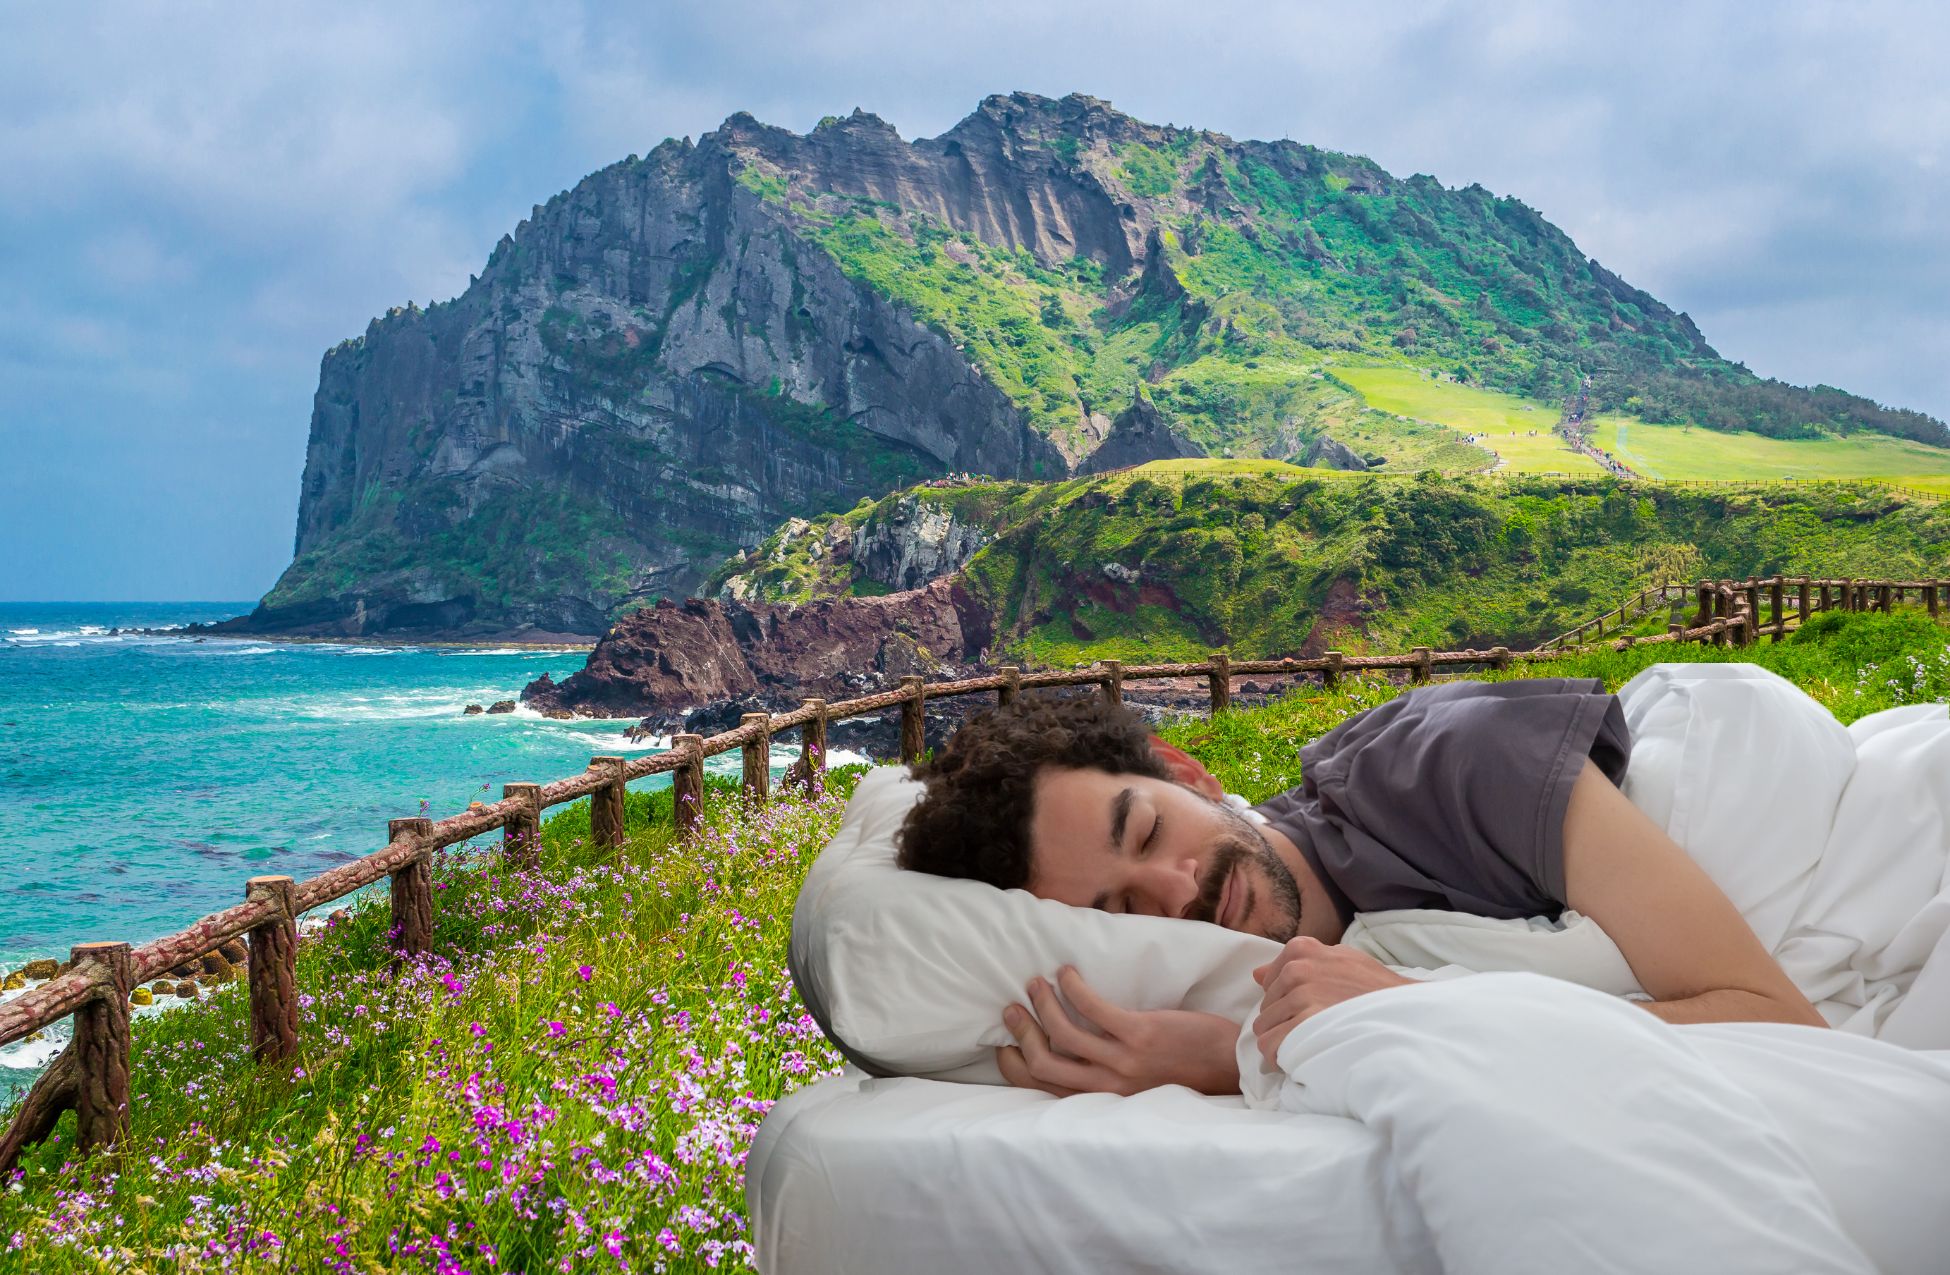 Best Hotels In Jeju Island South Korea: Top 7 Must-Stay Escapes!